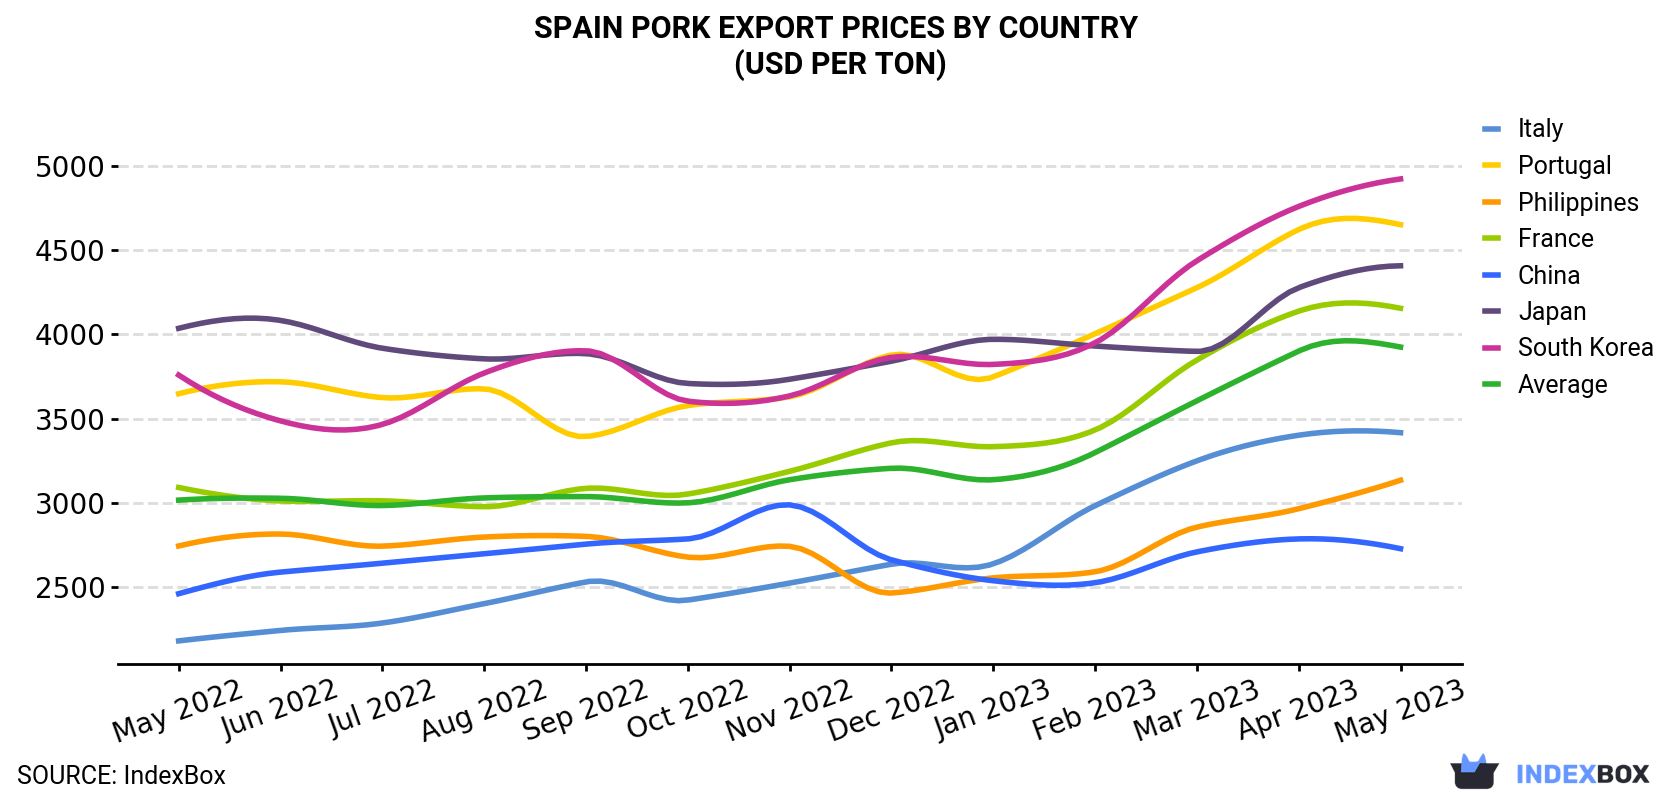 Spain Pork Export Prices By Country (USD Per Ton)